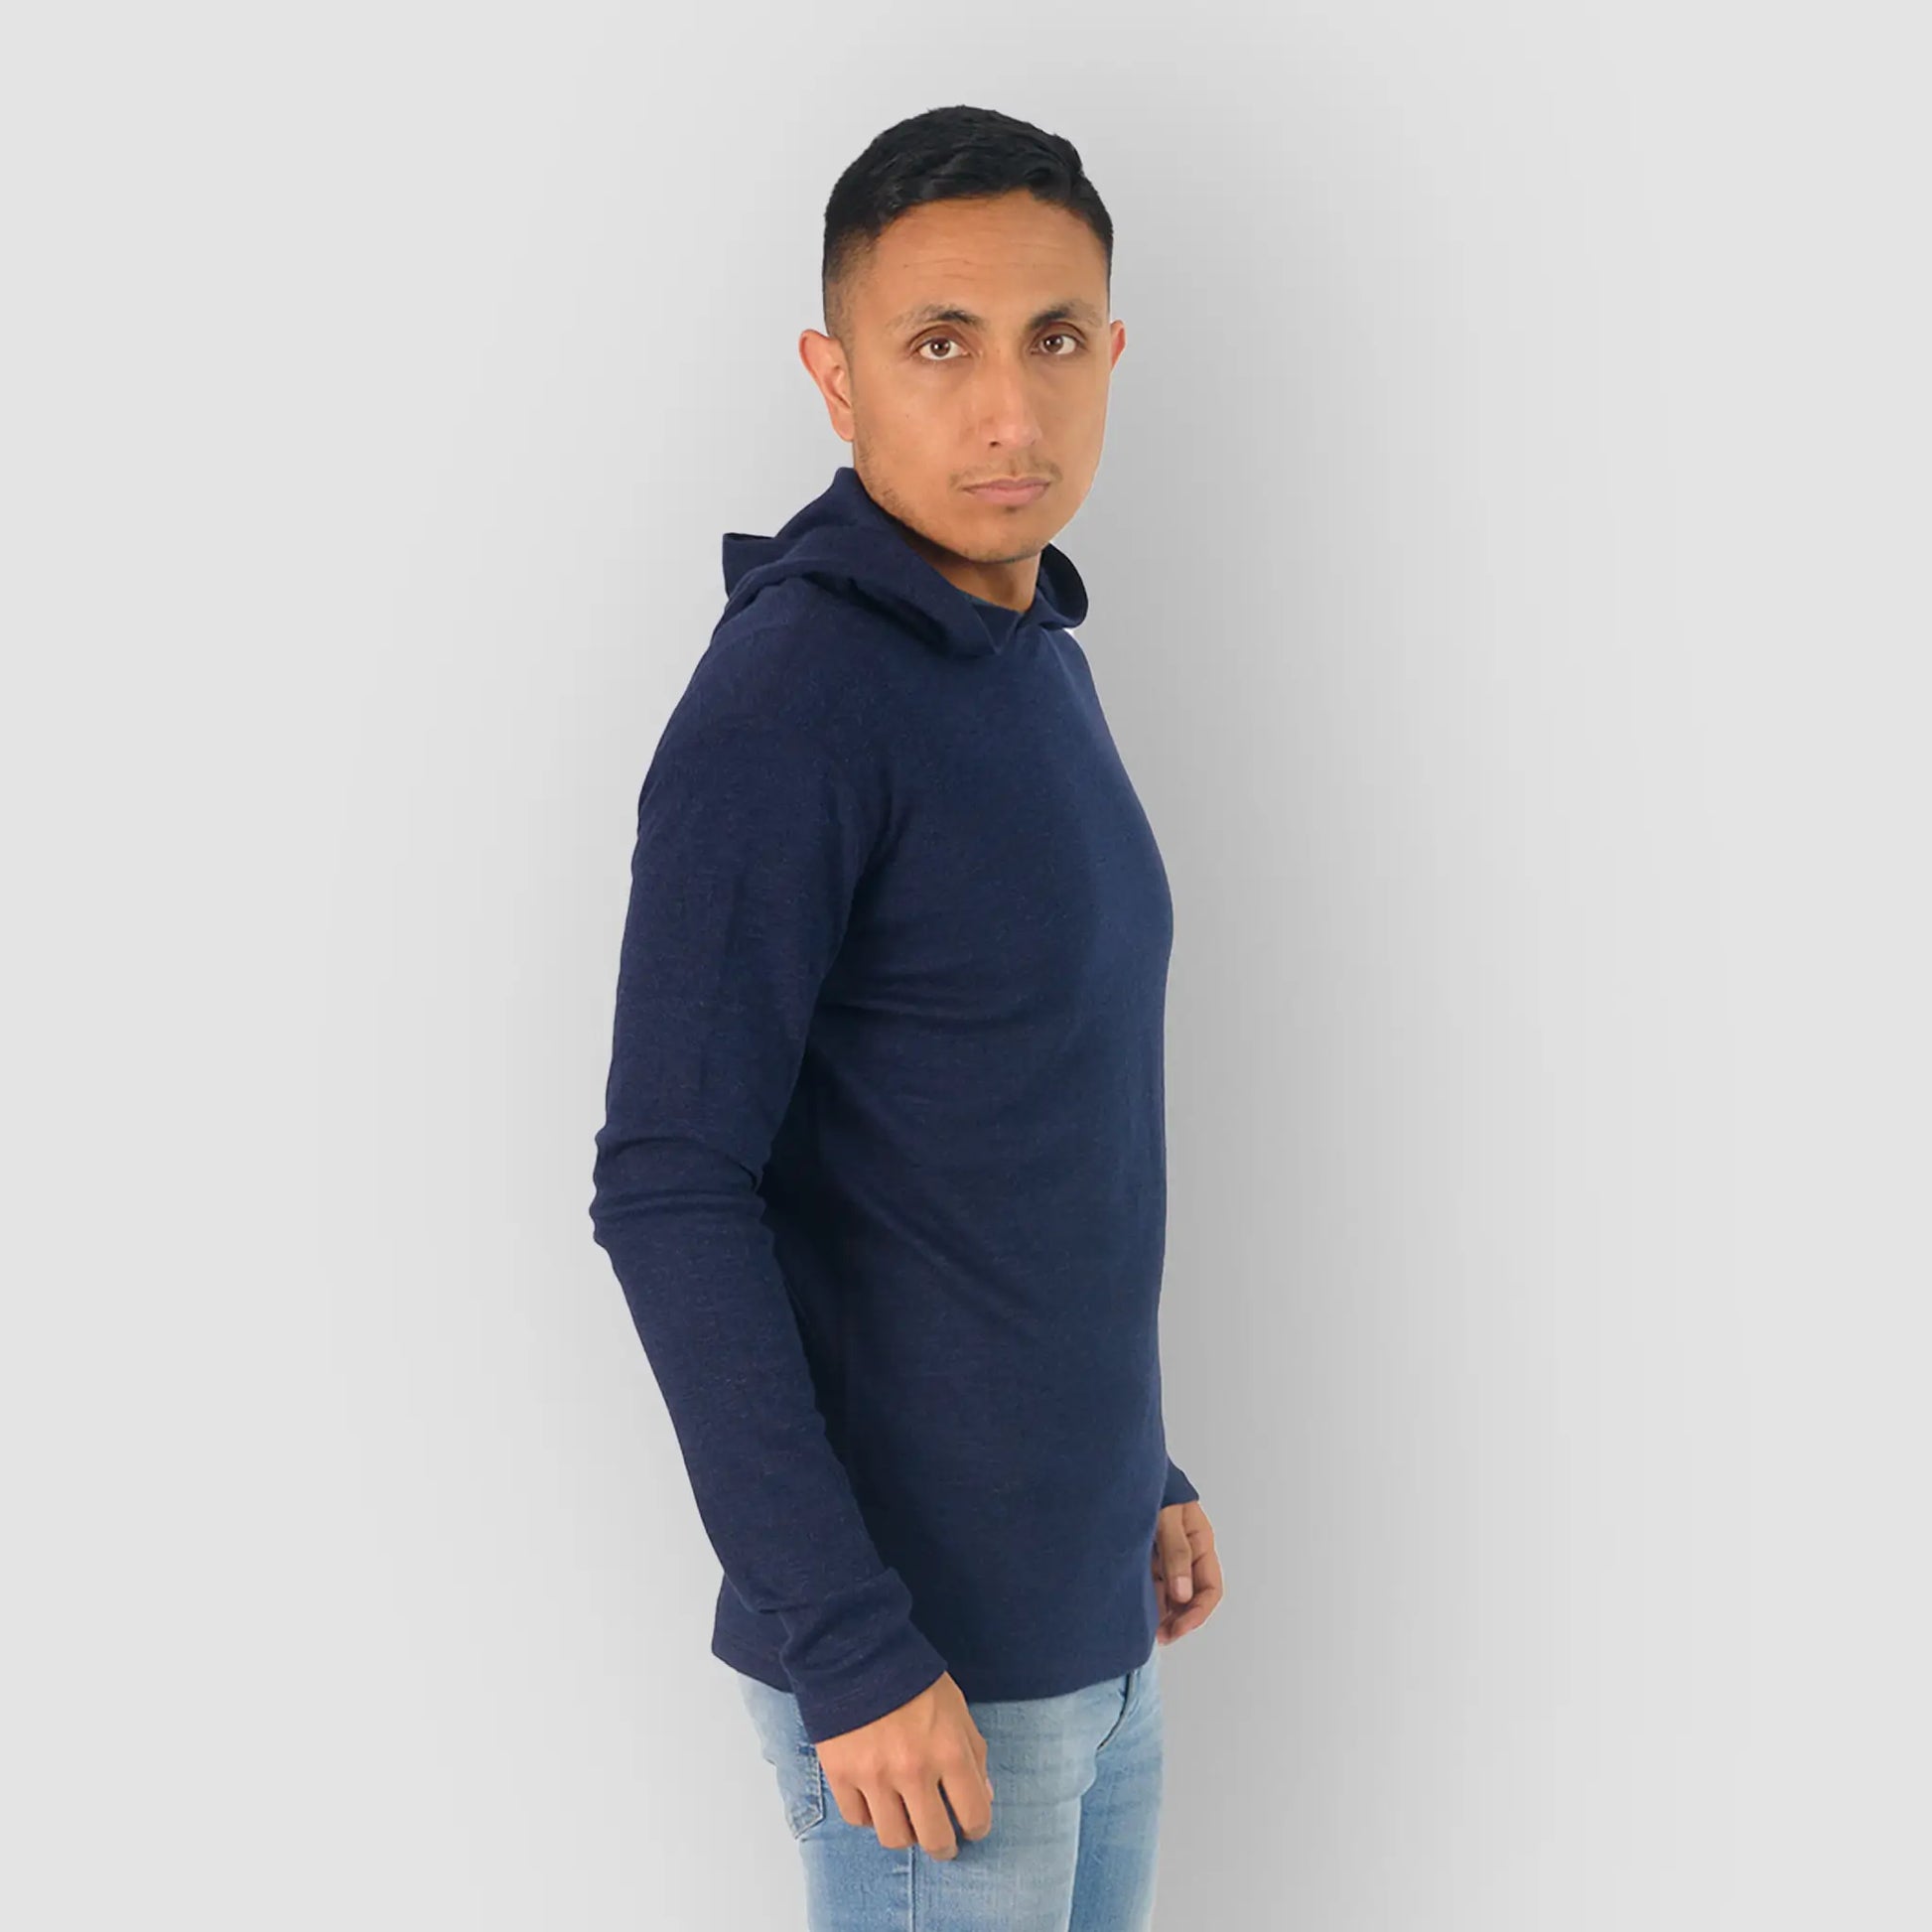 mens comfortable fit pullover hoodie lightweight color navy blue